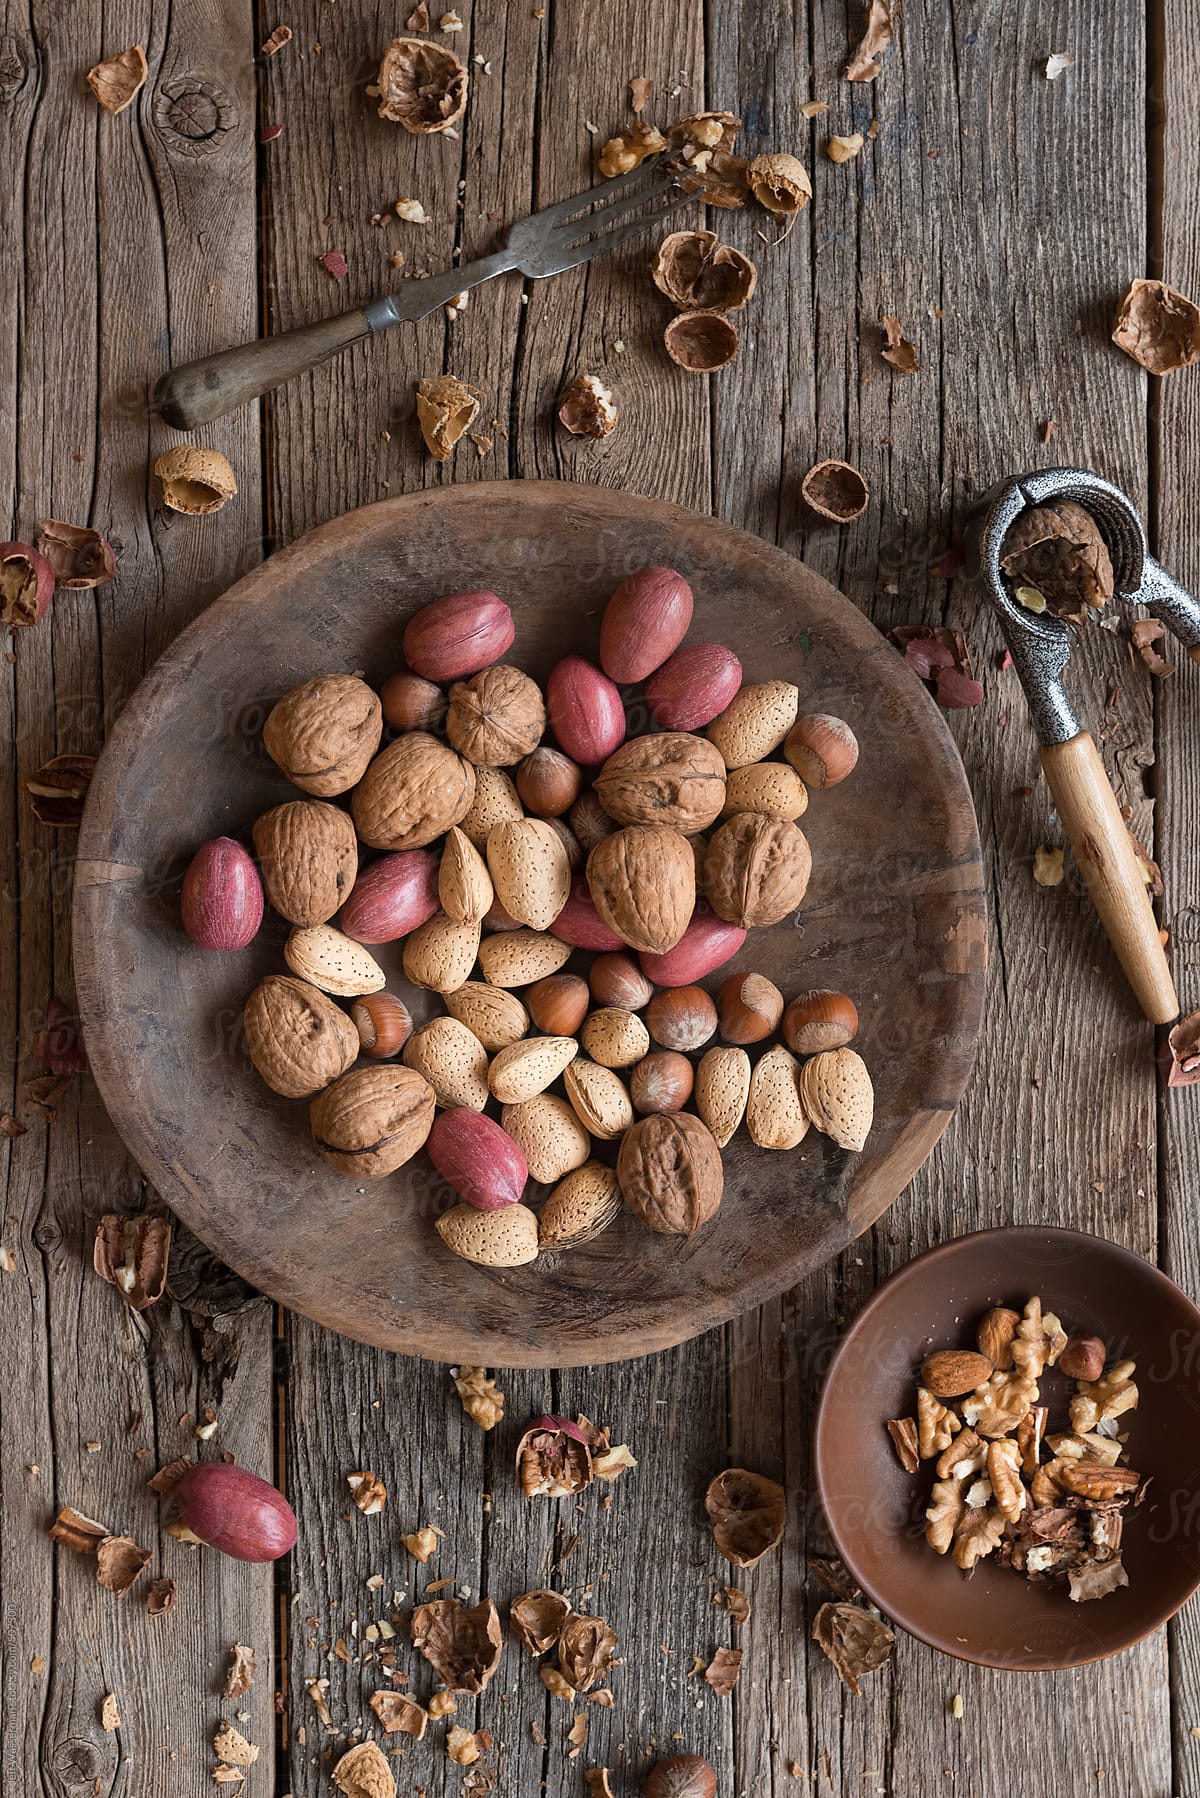 Assorted Raw Nuts - Rich in Omega-3